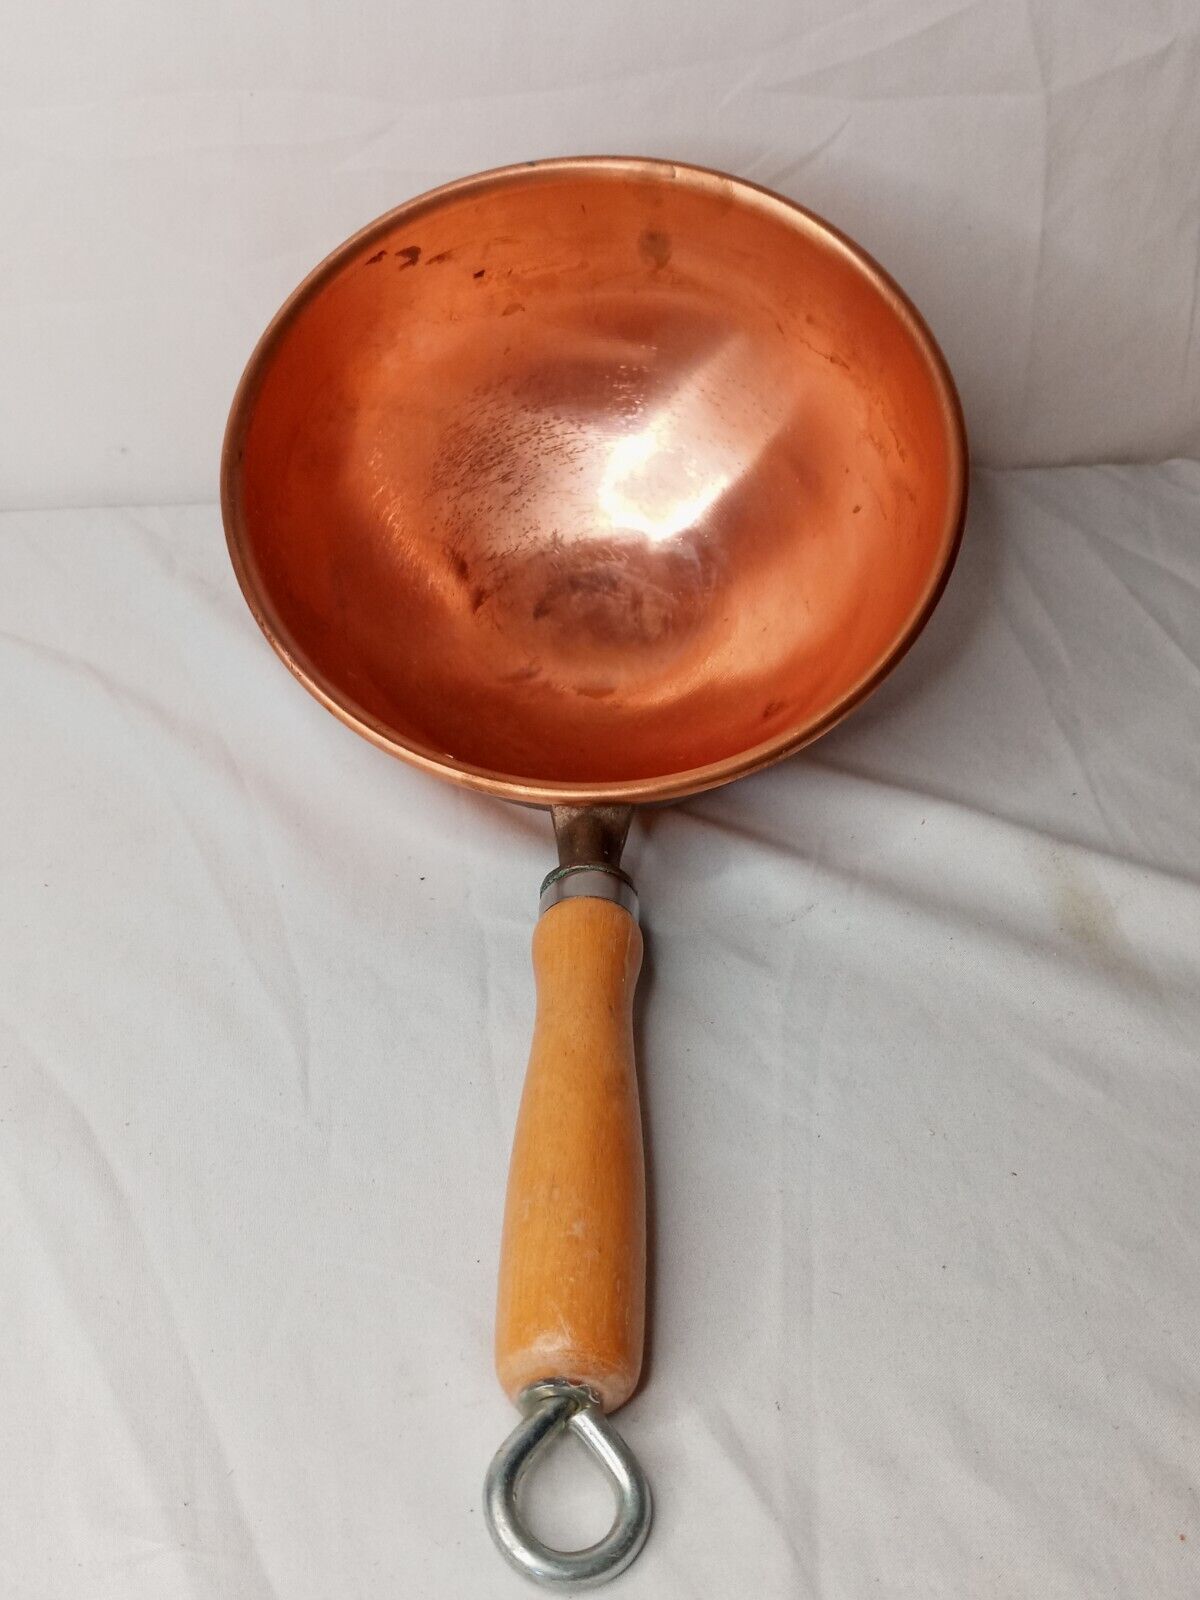 Vintage copper pot atlas metal spinning co USA - 8.5 inches Wide 4.5 inches Deep